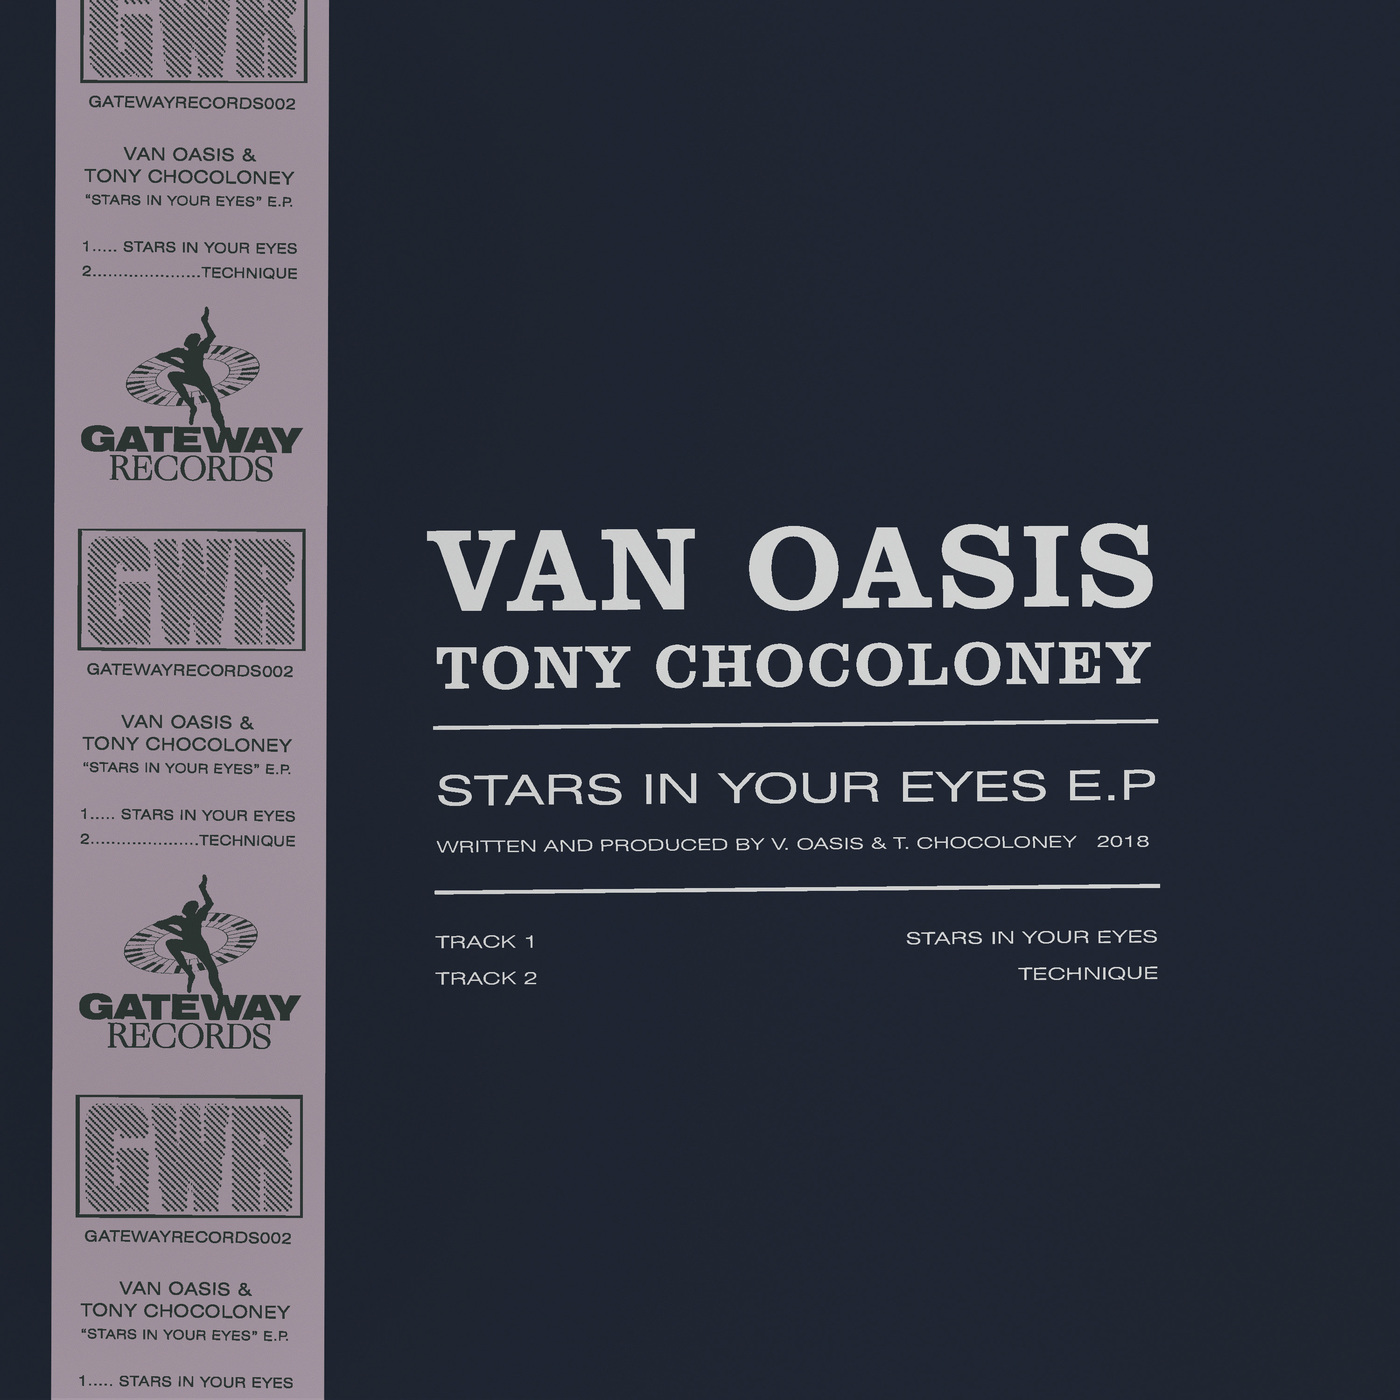 Van Oasis & Tony Chocoloney - Star in Your Eyes / Gateway Records